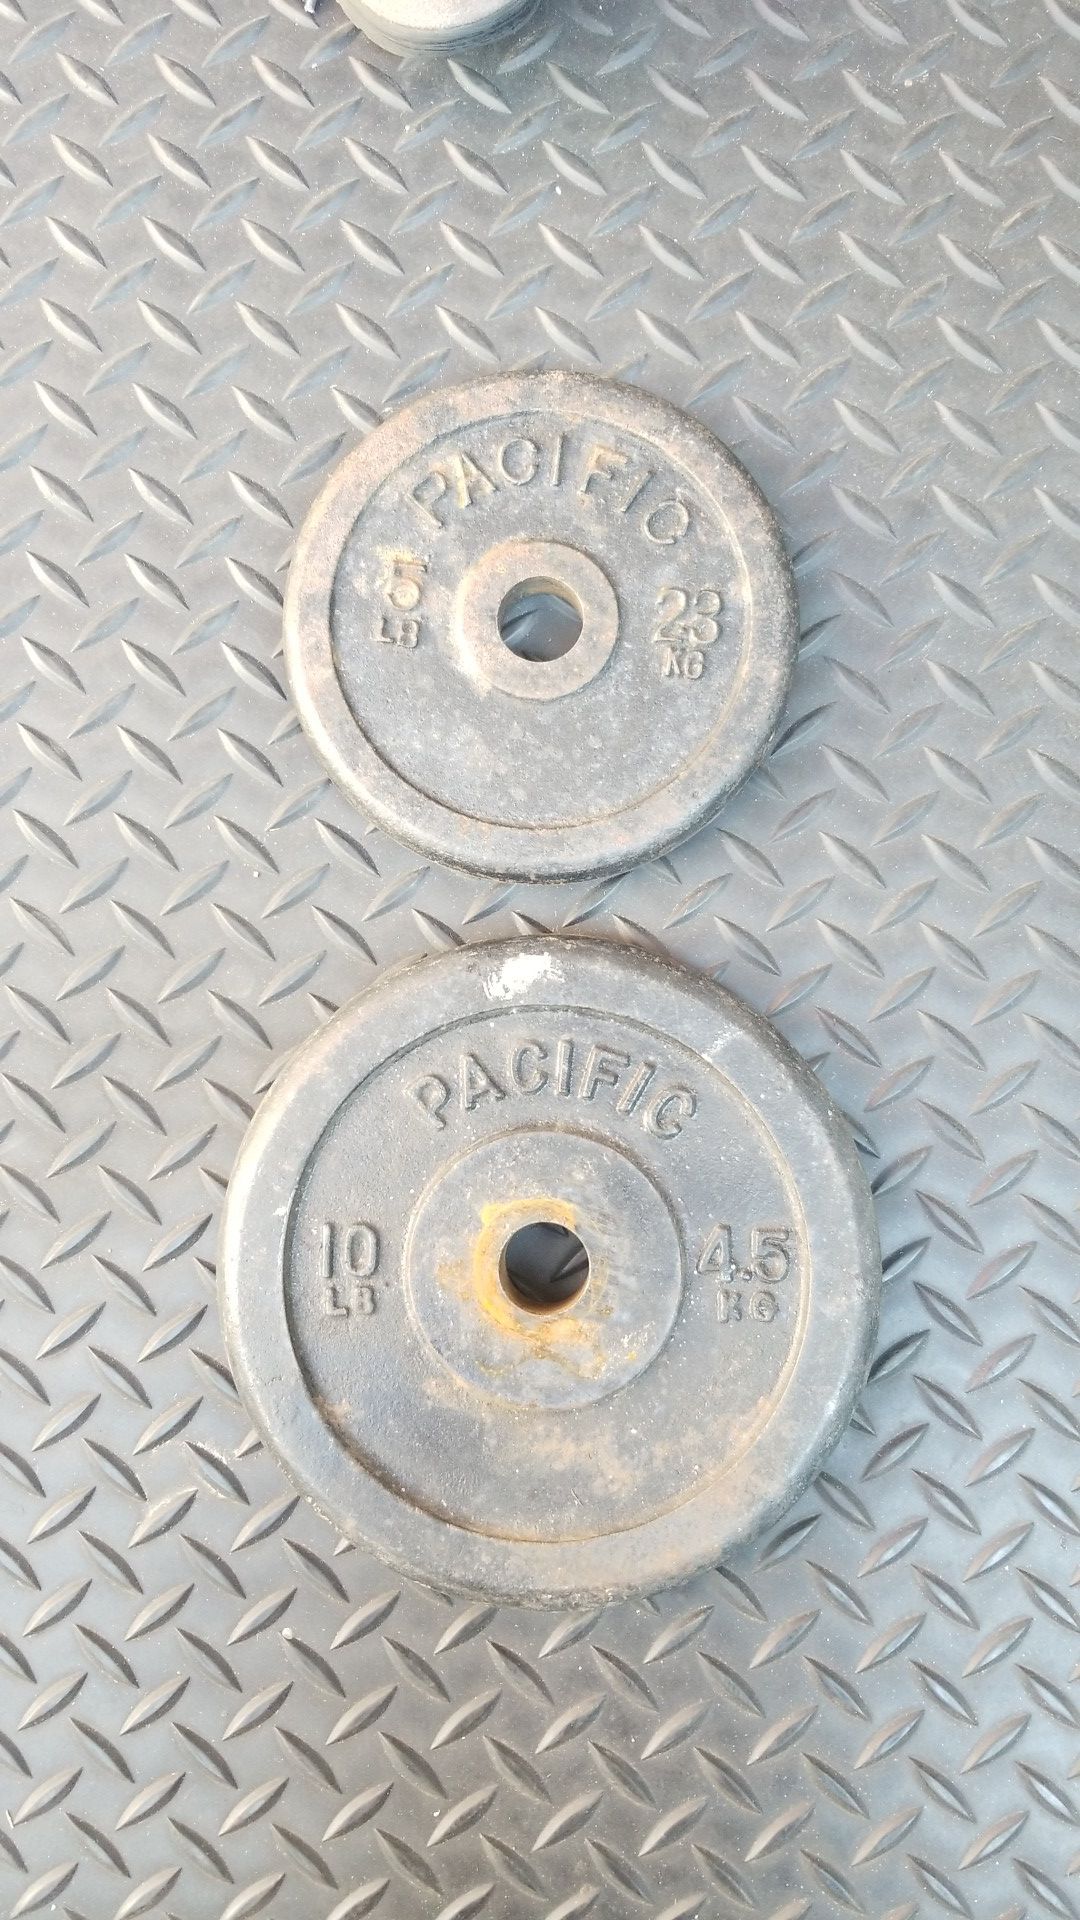 5 and 10 lb standard 1" weight plates